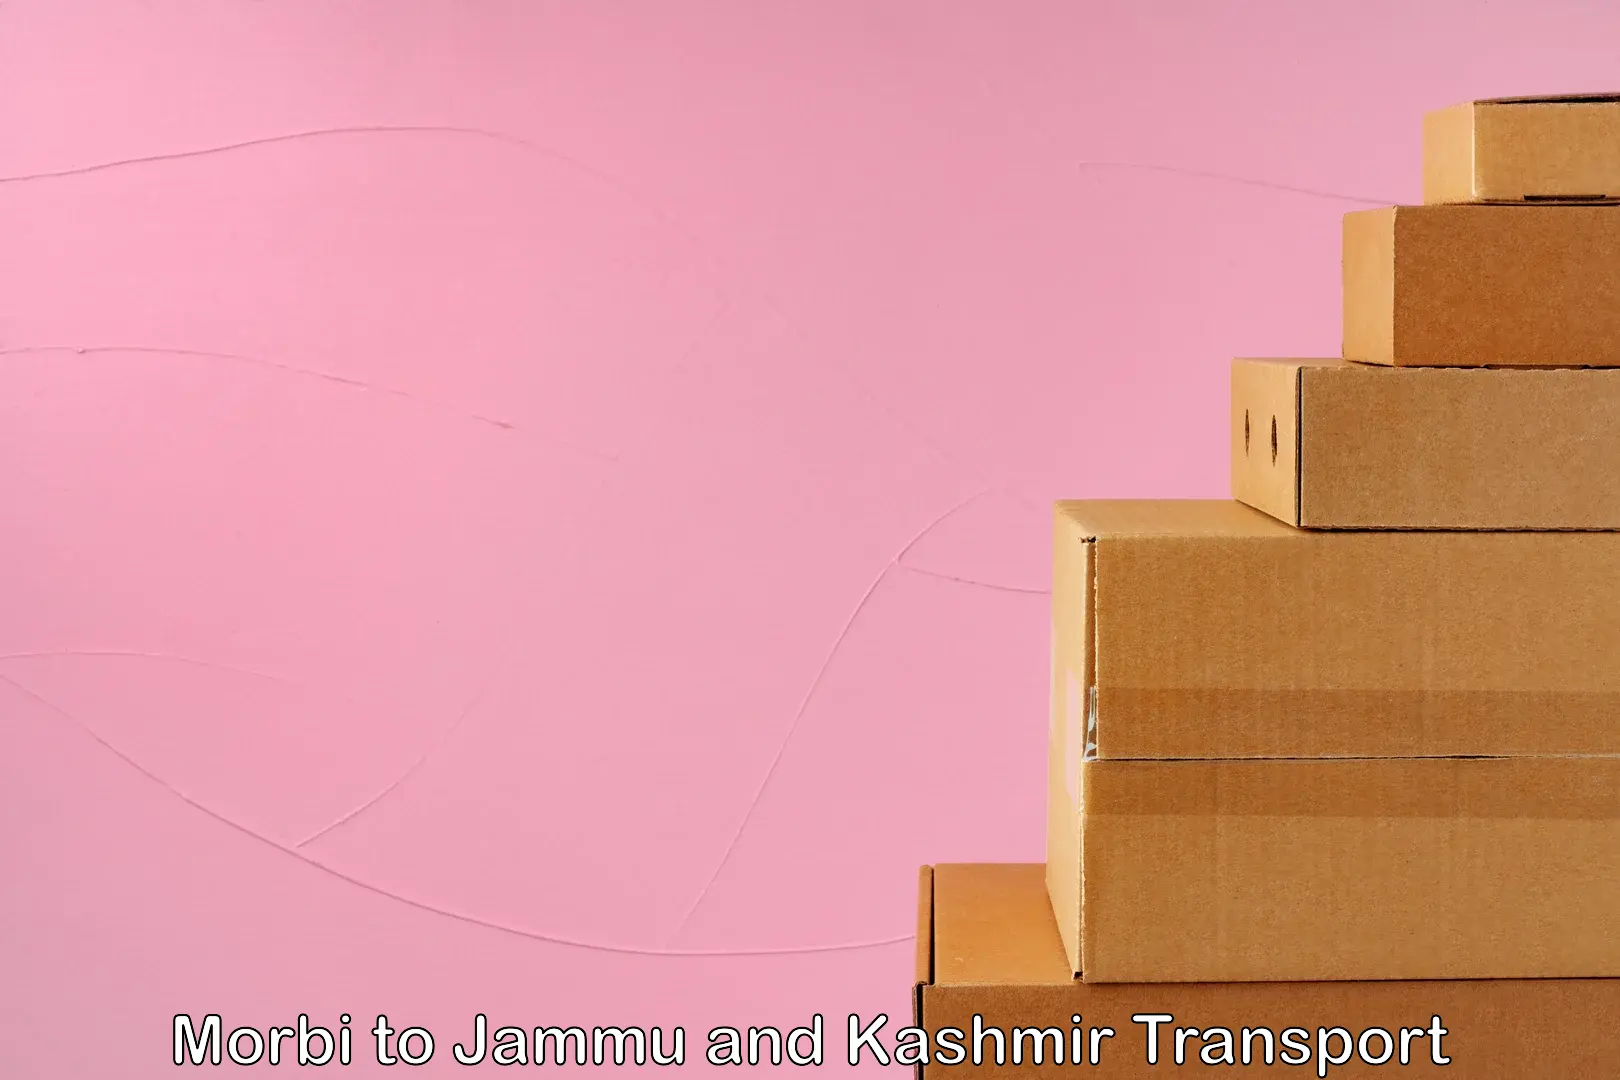 Goods delivery service Morbi to Jammu and Kashmir